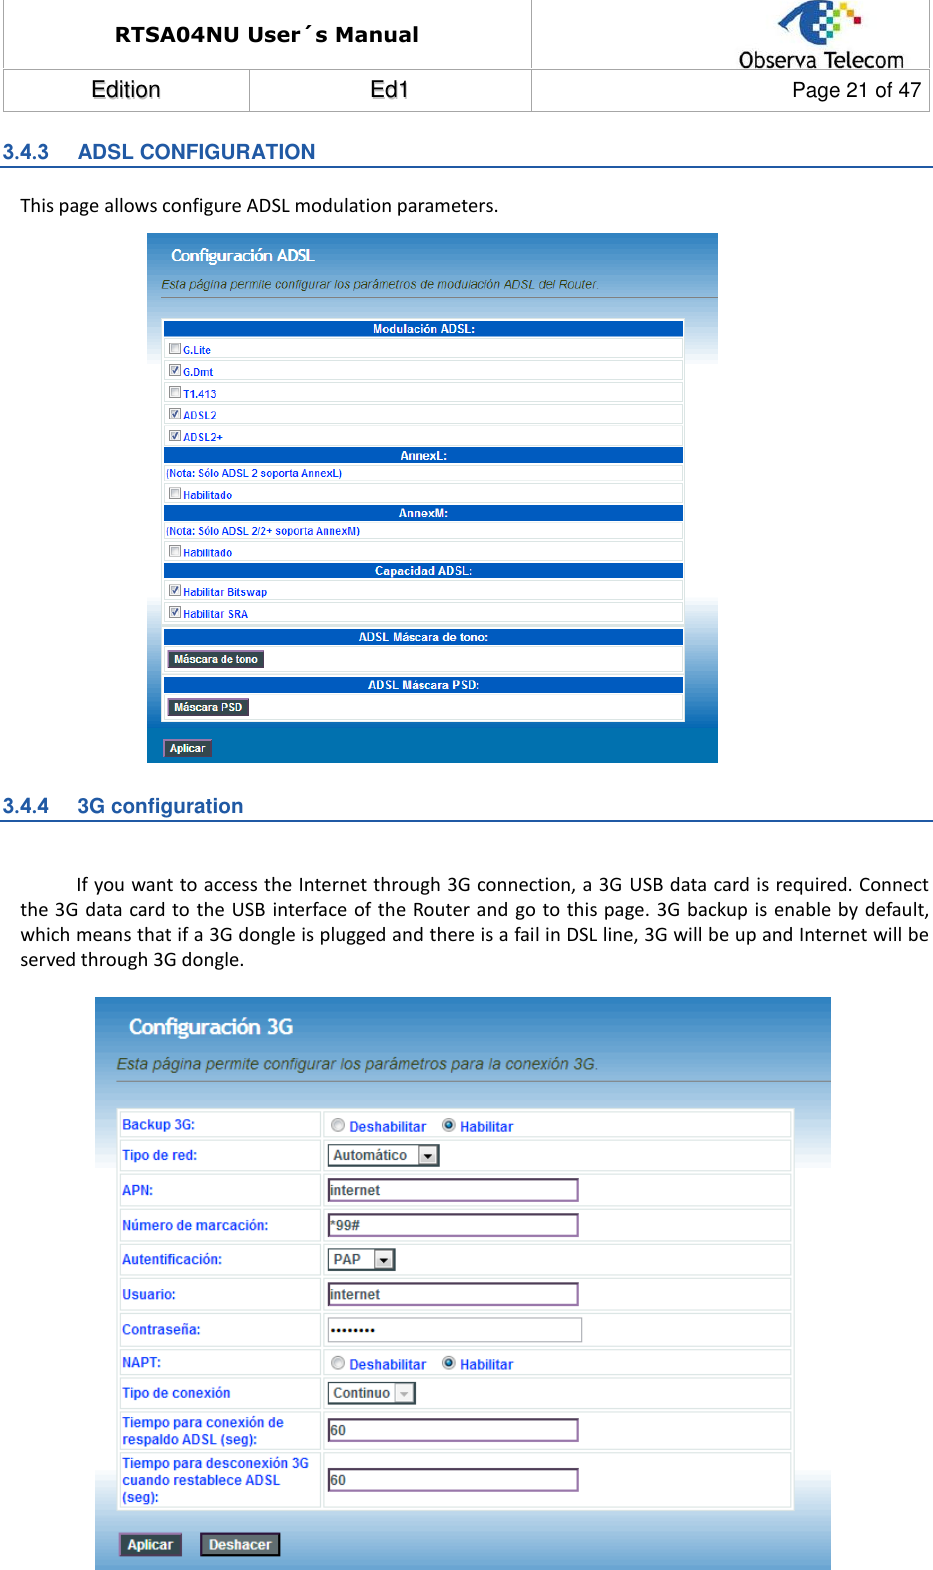 RTSA04NU User´s Manual  EEddiittiioonn  EEdd11  Page 21 of 47  3.4.3  ADSL CONFIGURATION This page allows configure ADSL modulation parameters.                       3.4.4  3G configuration  If you want to access the Internet through 3G connection, a 3G USB data card is required. Connect the 3G data card to the USB interface of the Router and go  to this page. 3G backup is enable by default, which means that if a 3G dongle is plugged and there is a fail in DSL line, 3G will be up and Internet will be served through 3G dongle.                           